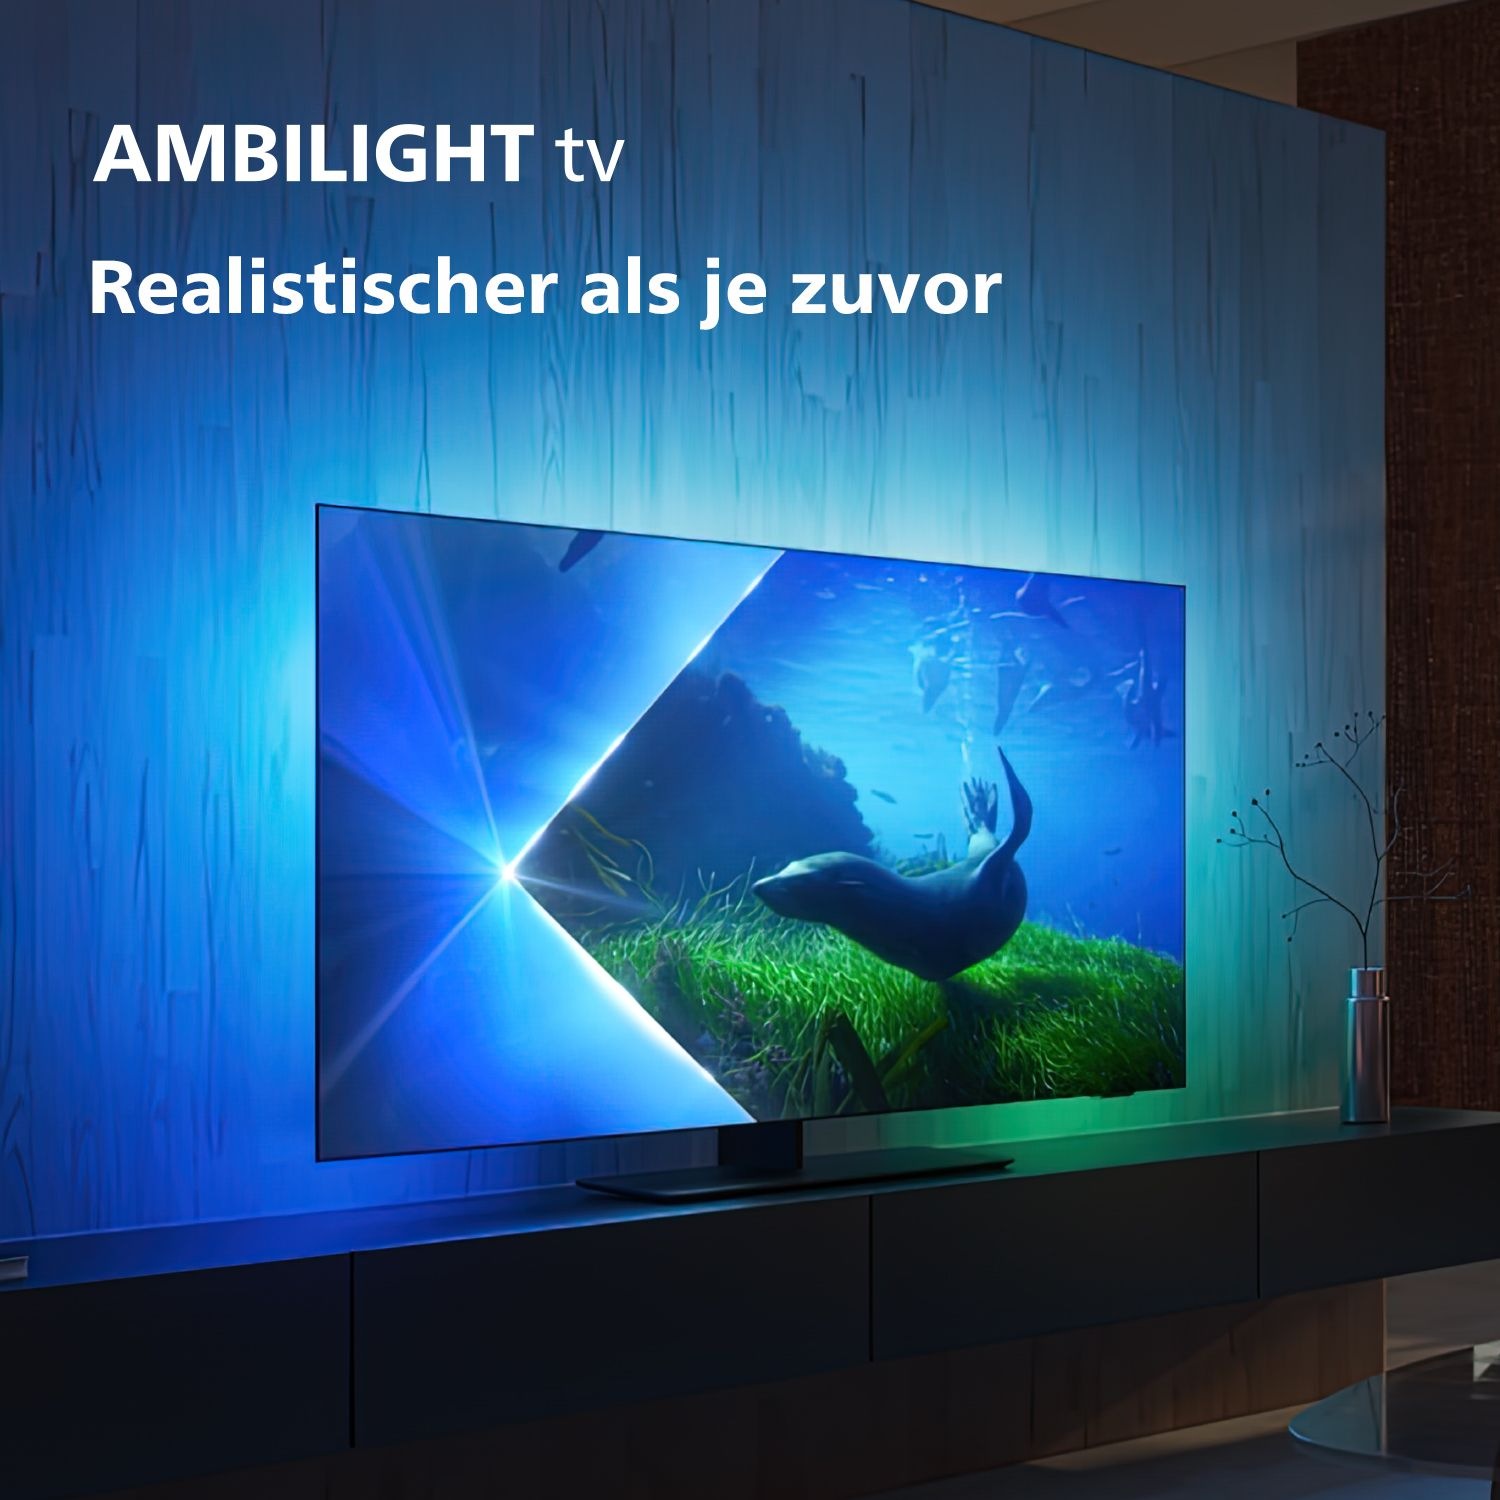 OTTO Philips online TV cm/48 bei LED-Fernseher »48OLED808/12«, 122 4K Ultra Smart-TV-Android HD, Zoll,